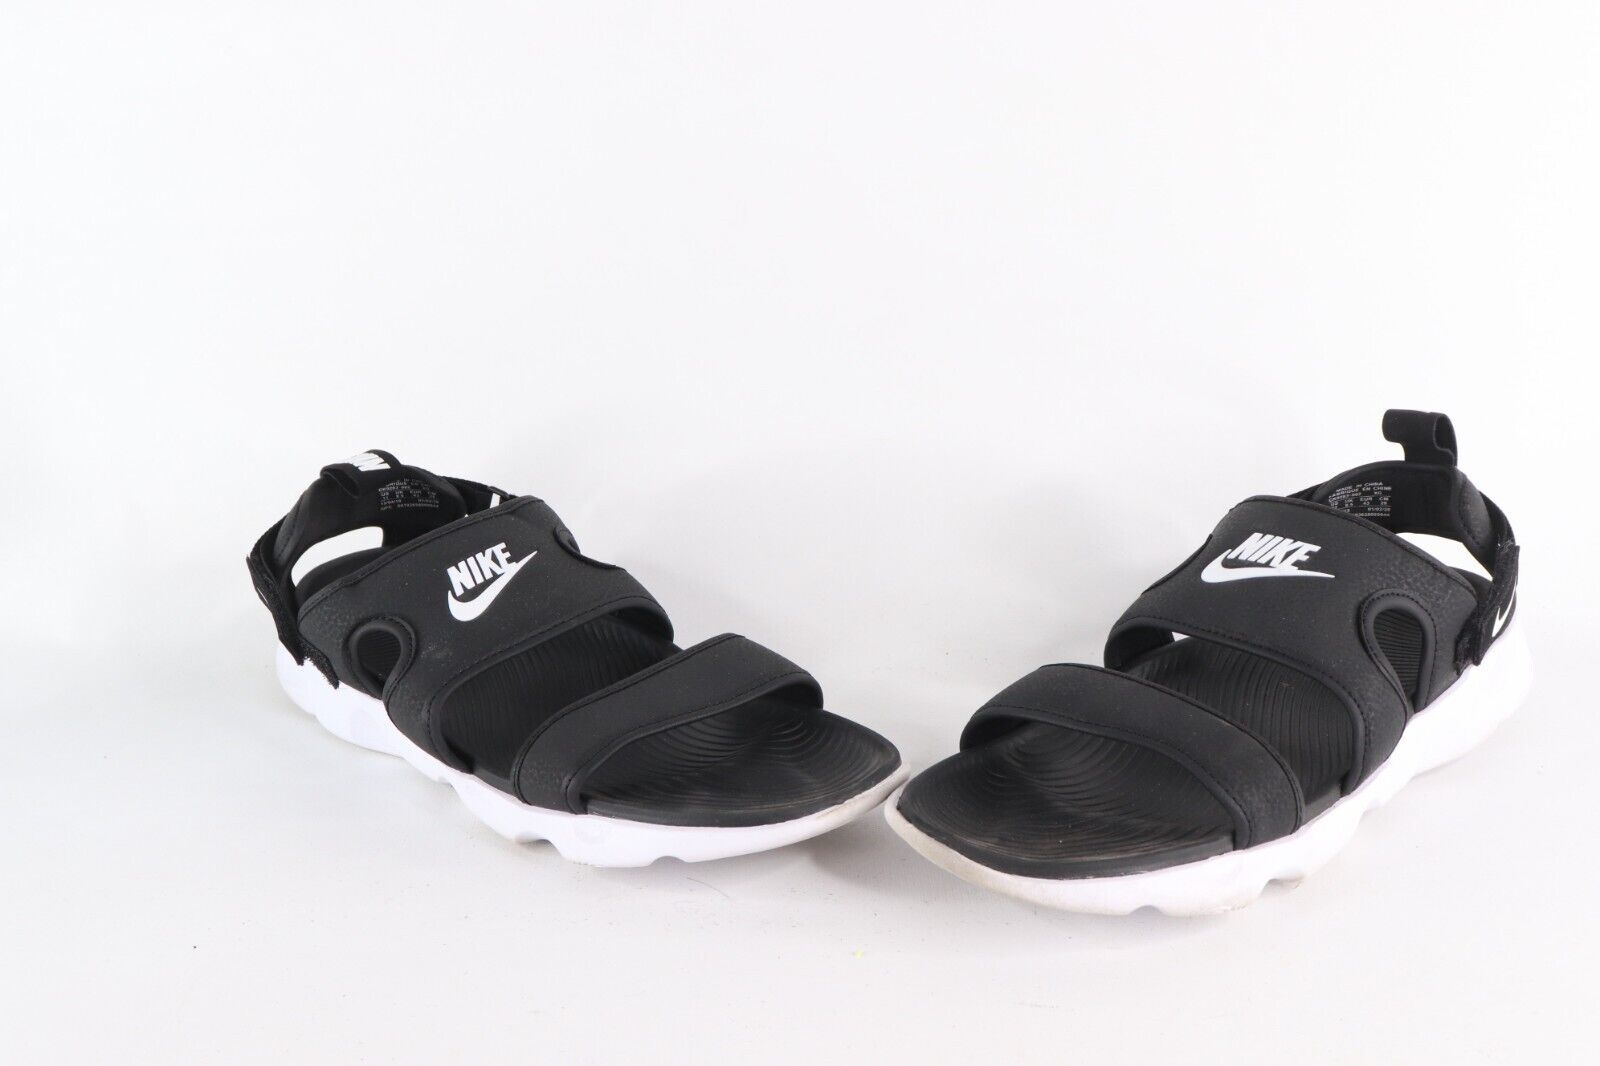 Primary image for Nike Womens Size 11 Owaysis Spell Out Swoosh Sandals Shoes Black CK9283-002